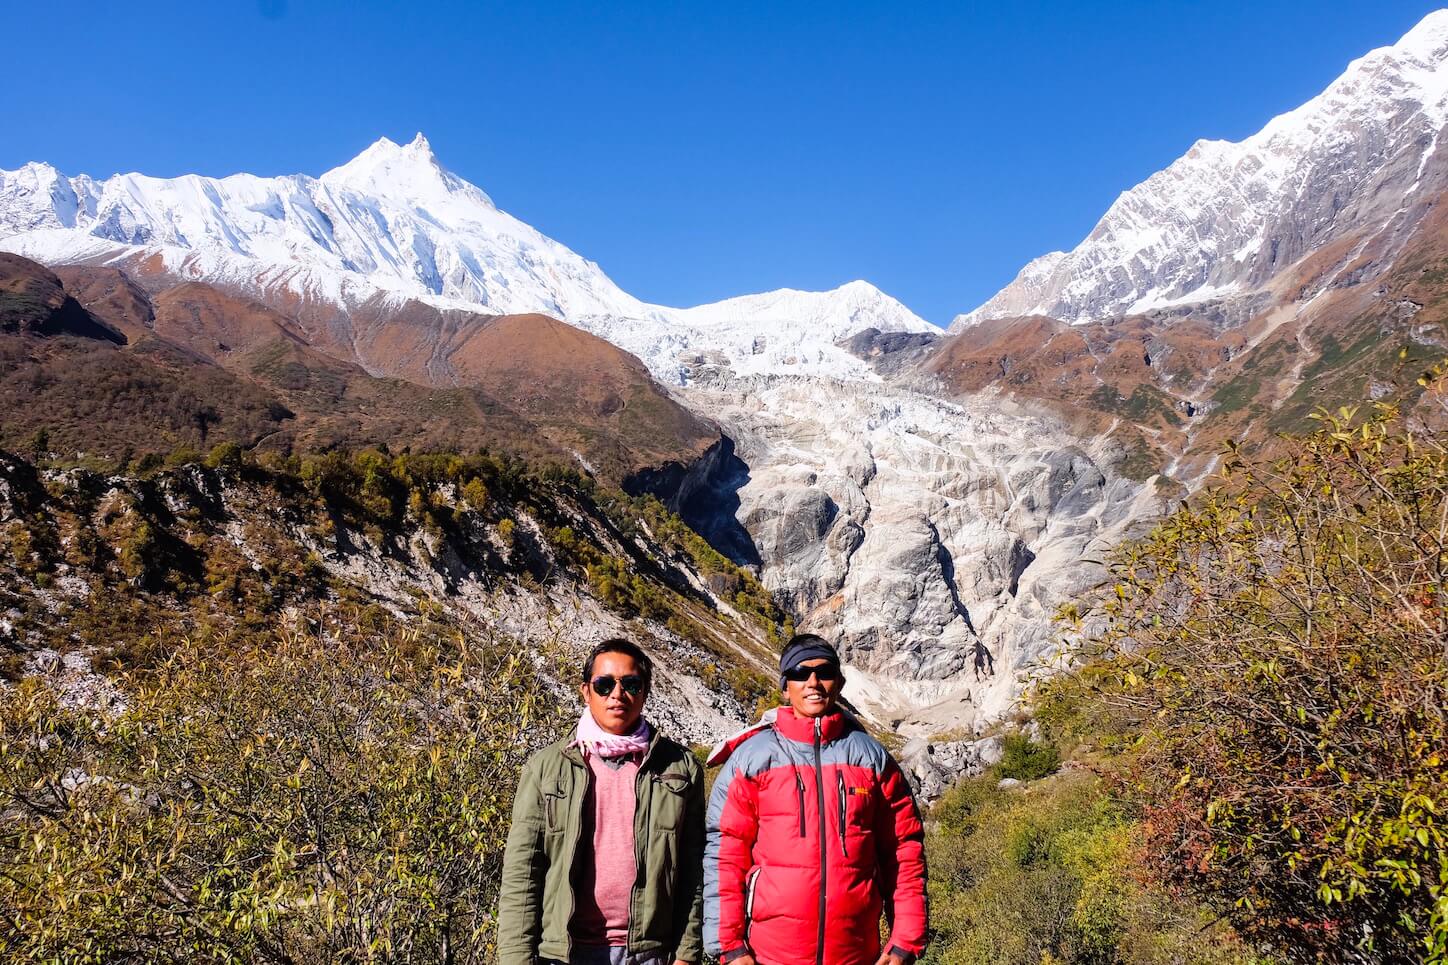 A Nepalese guide and porter in front of a mountain backdrop